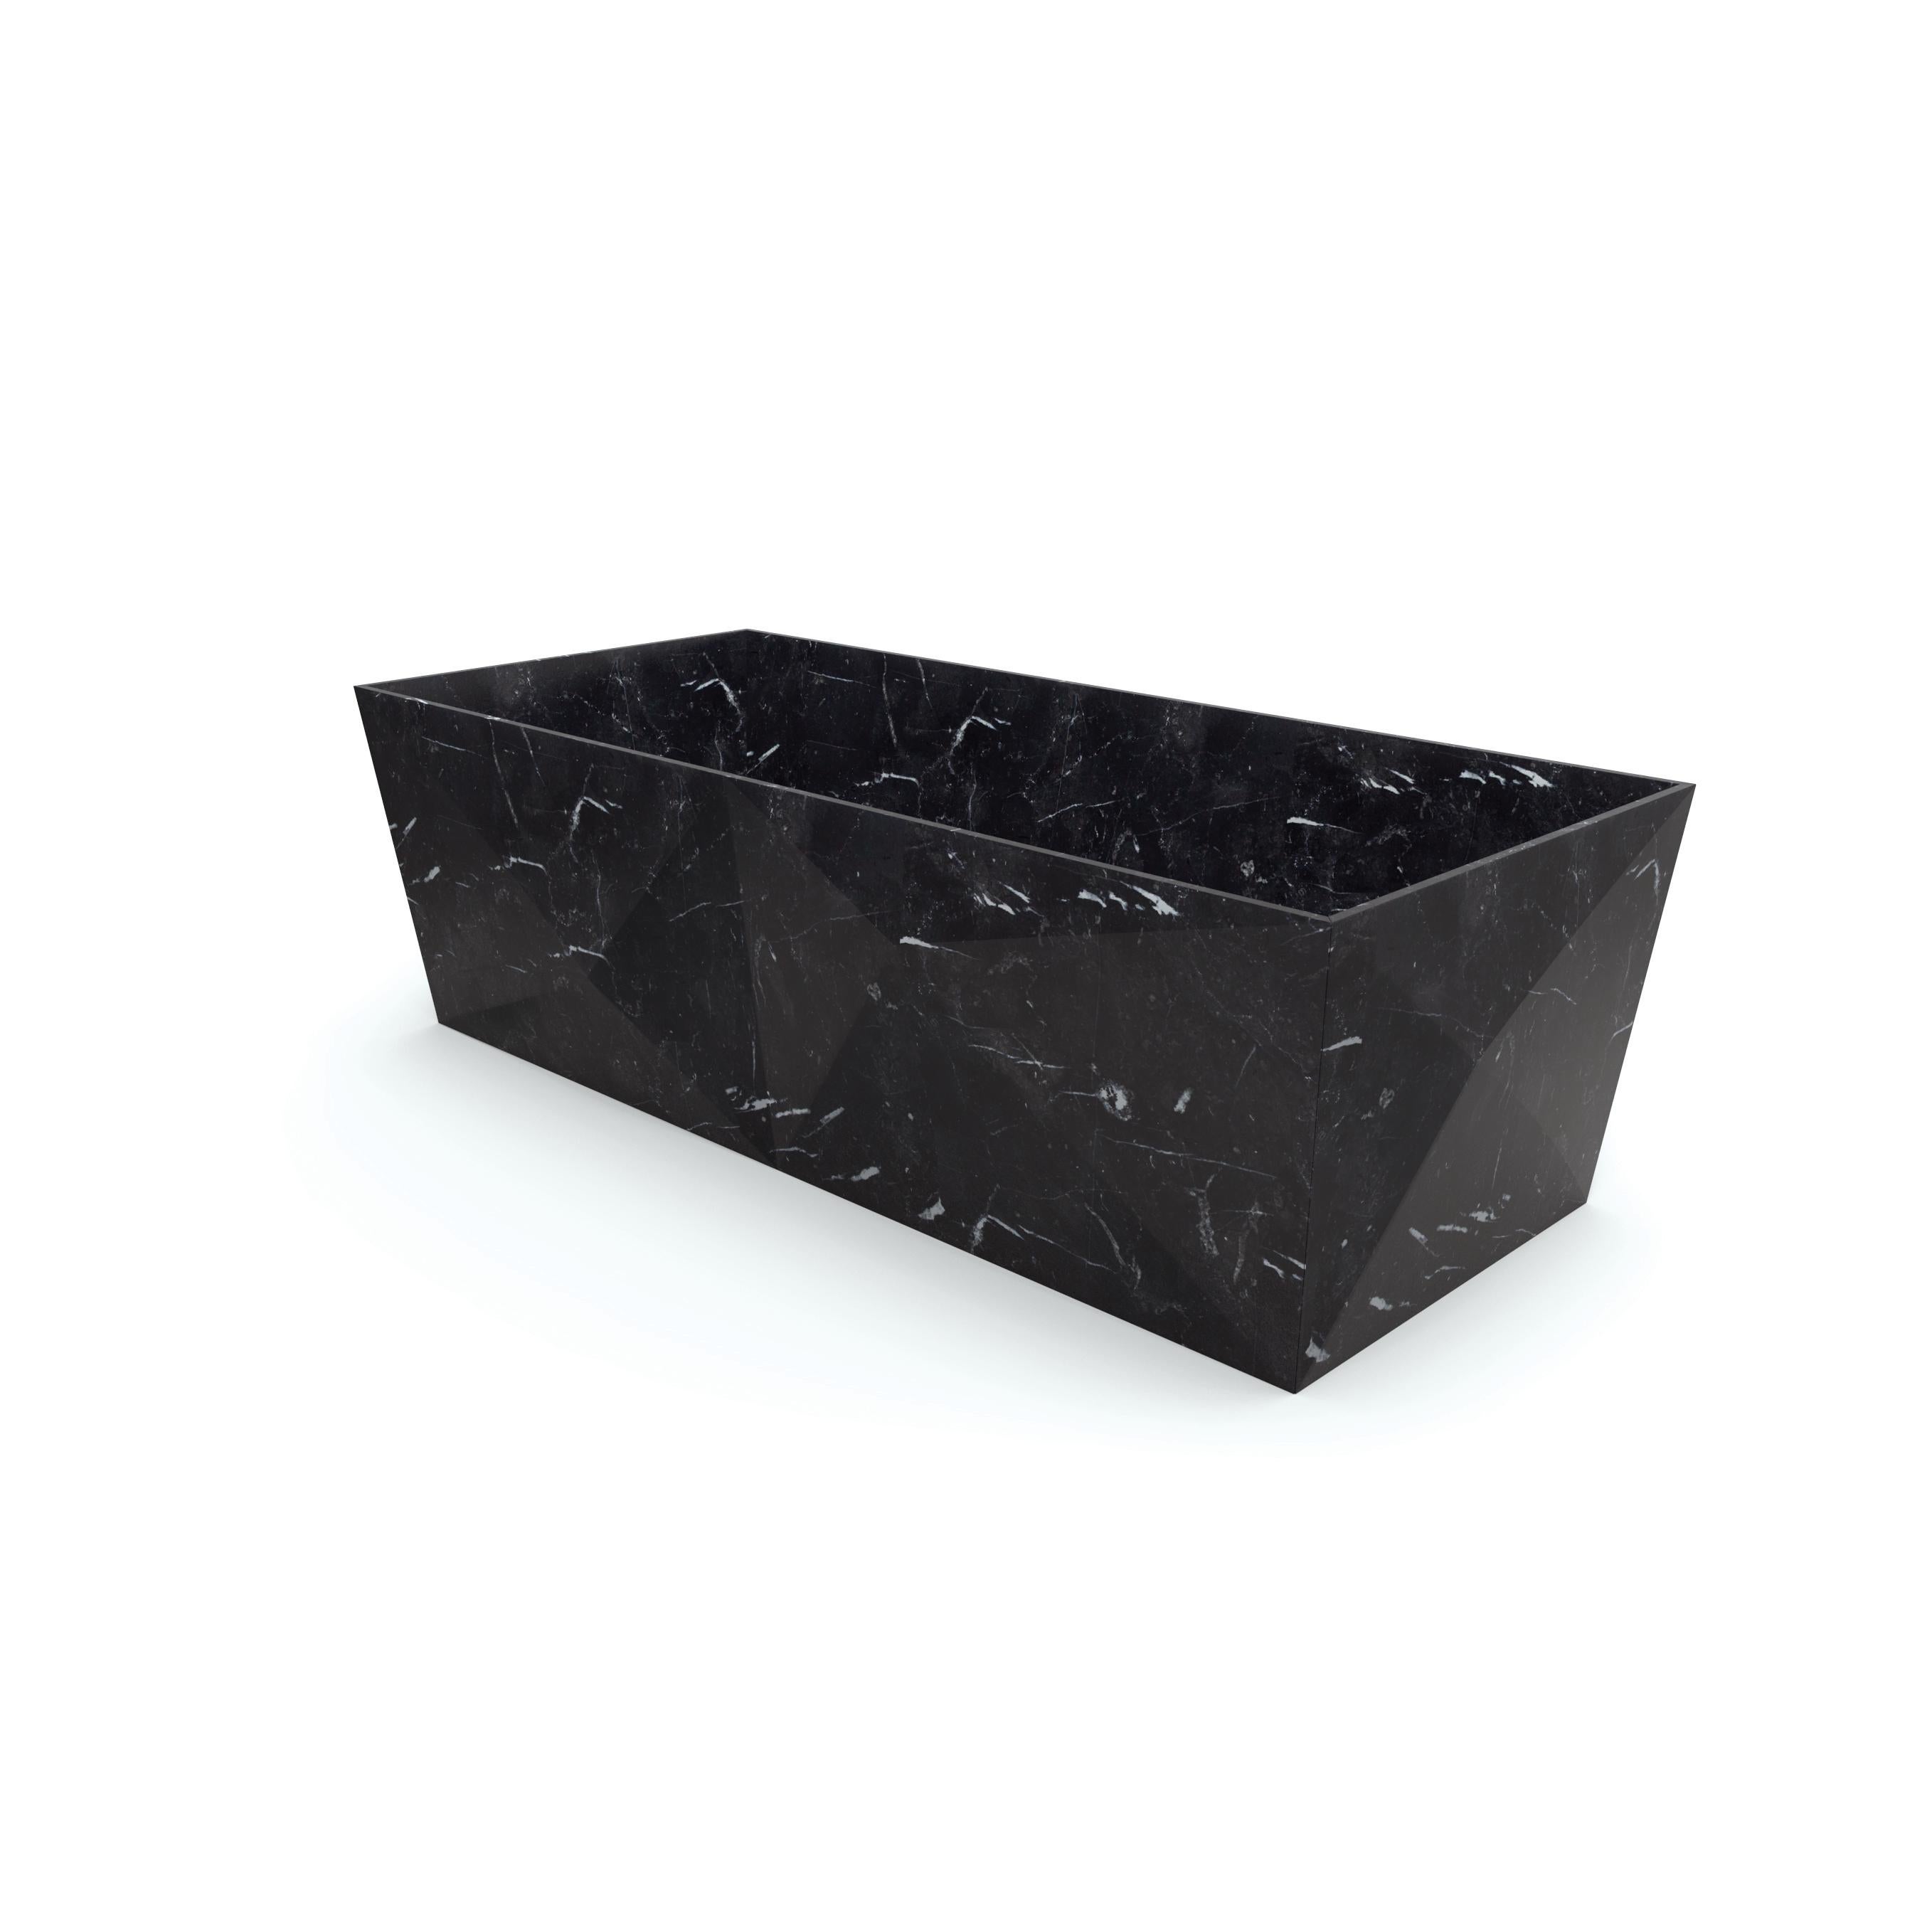 Entity Punta bath by Marmi Serafini
Materials: Nero Marquinia marble.
Dimensions: D 80 x W 180 x H 50 cm
Available in other marbles and assembled or on-block versions.
Tap not included.

Bold and striking lines that draw immediate attention.